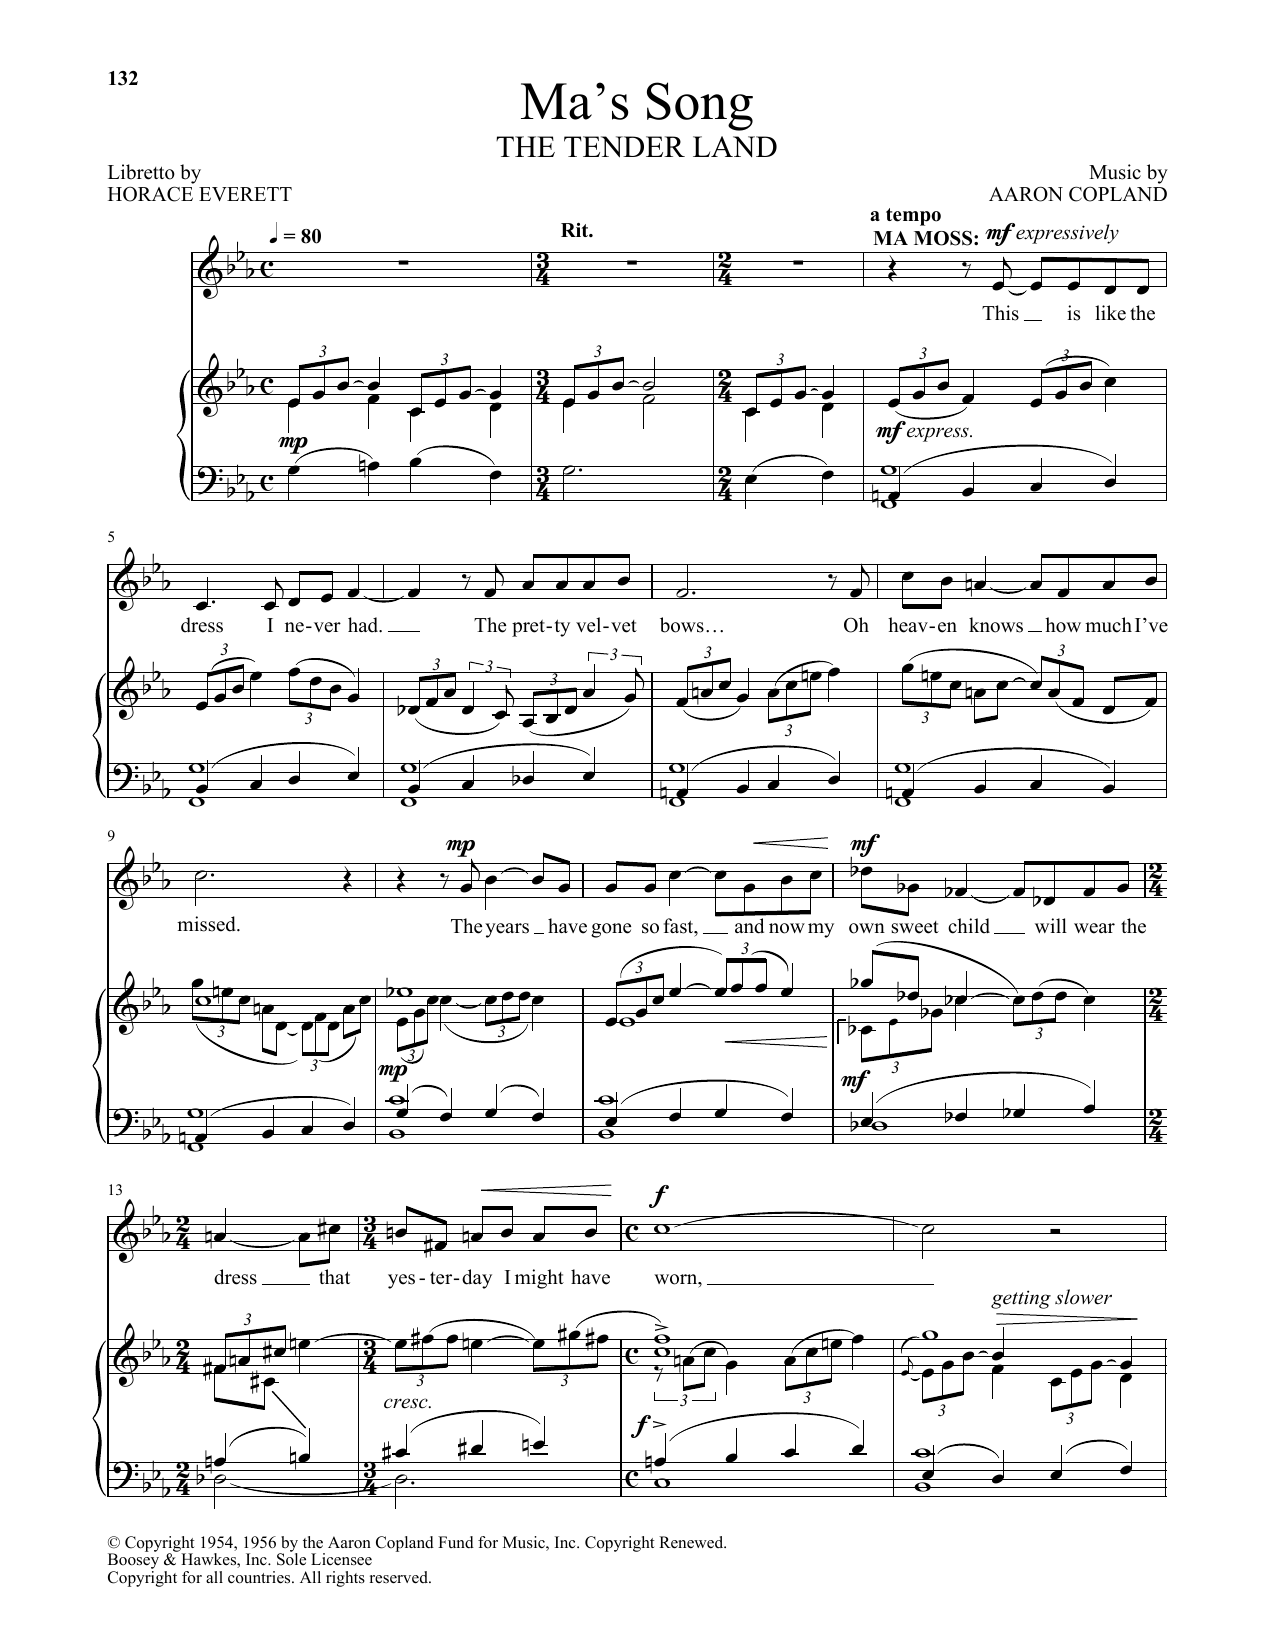 Download Aaron Copland Ma's Song (from The Tender Land) Sheet Music